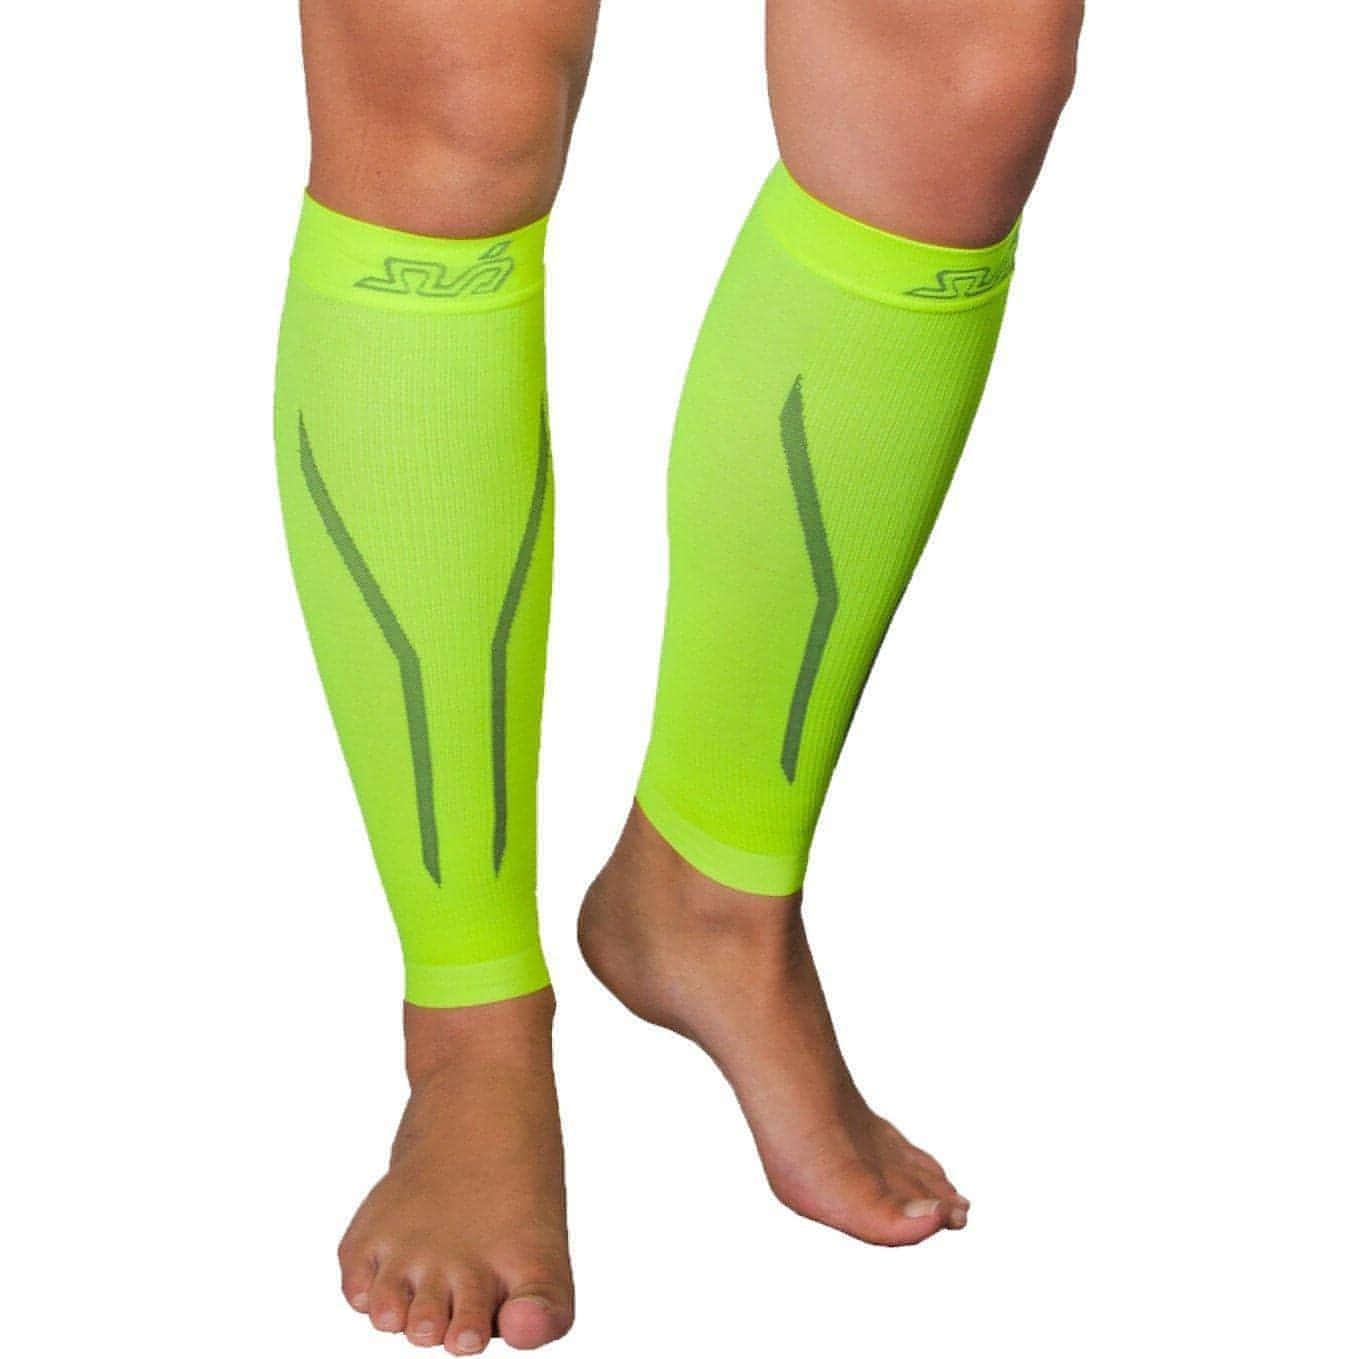 Sub Sports Seamless Dual Compression Calf Guards - Yellow - Start Fitness